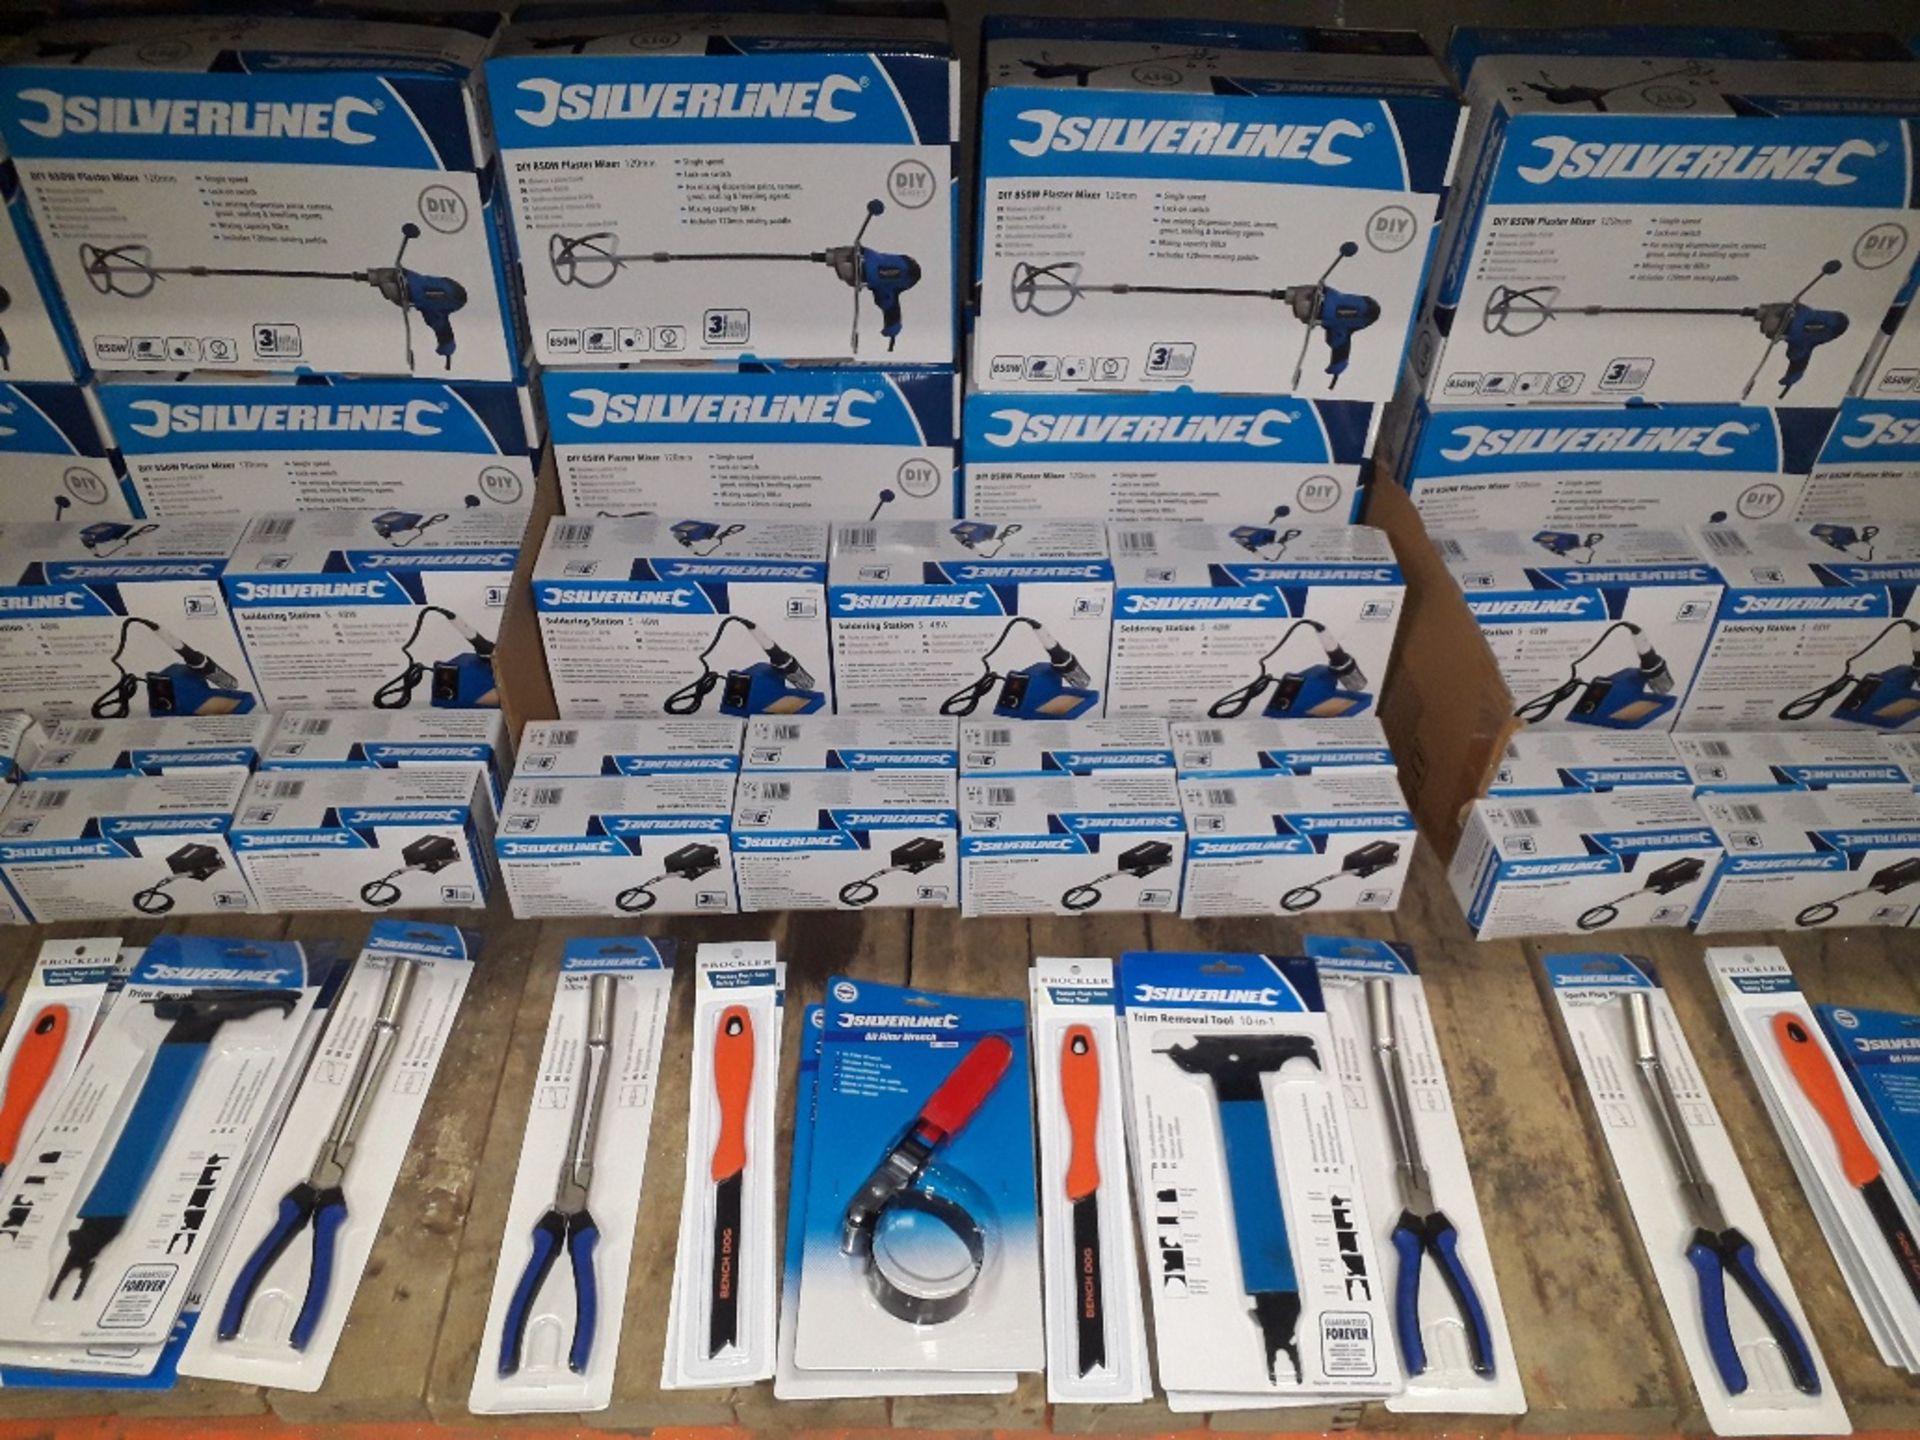 30 PC BRAND NEW SILVERLINE / ROCKLER MIXED TOOL LOT COMPRISING - 4 X 850W PLASTER / PAINT MIXERS,